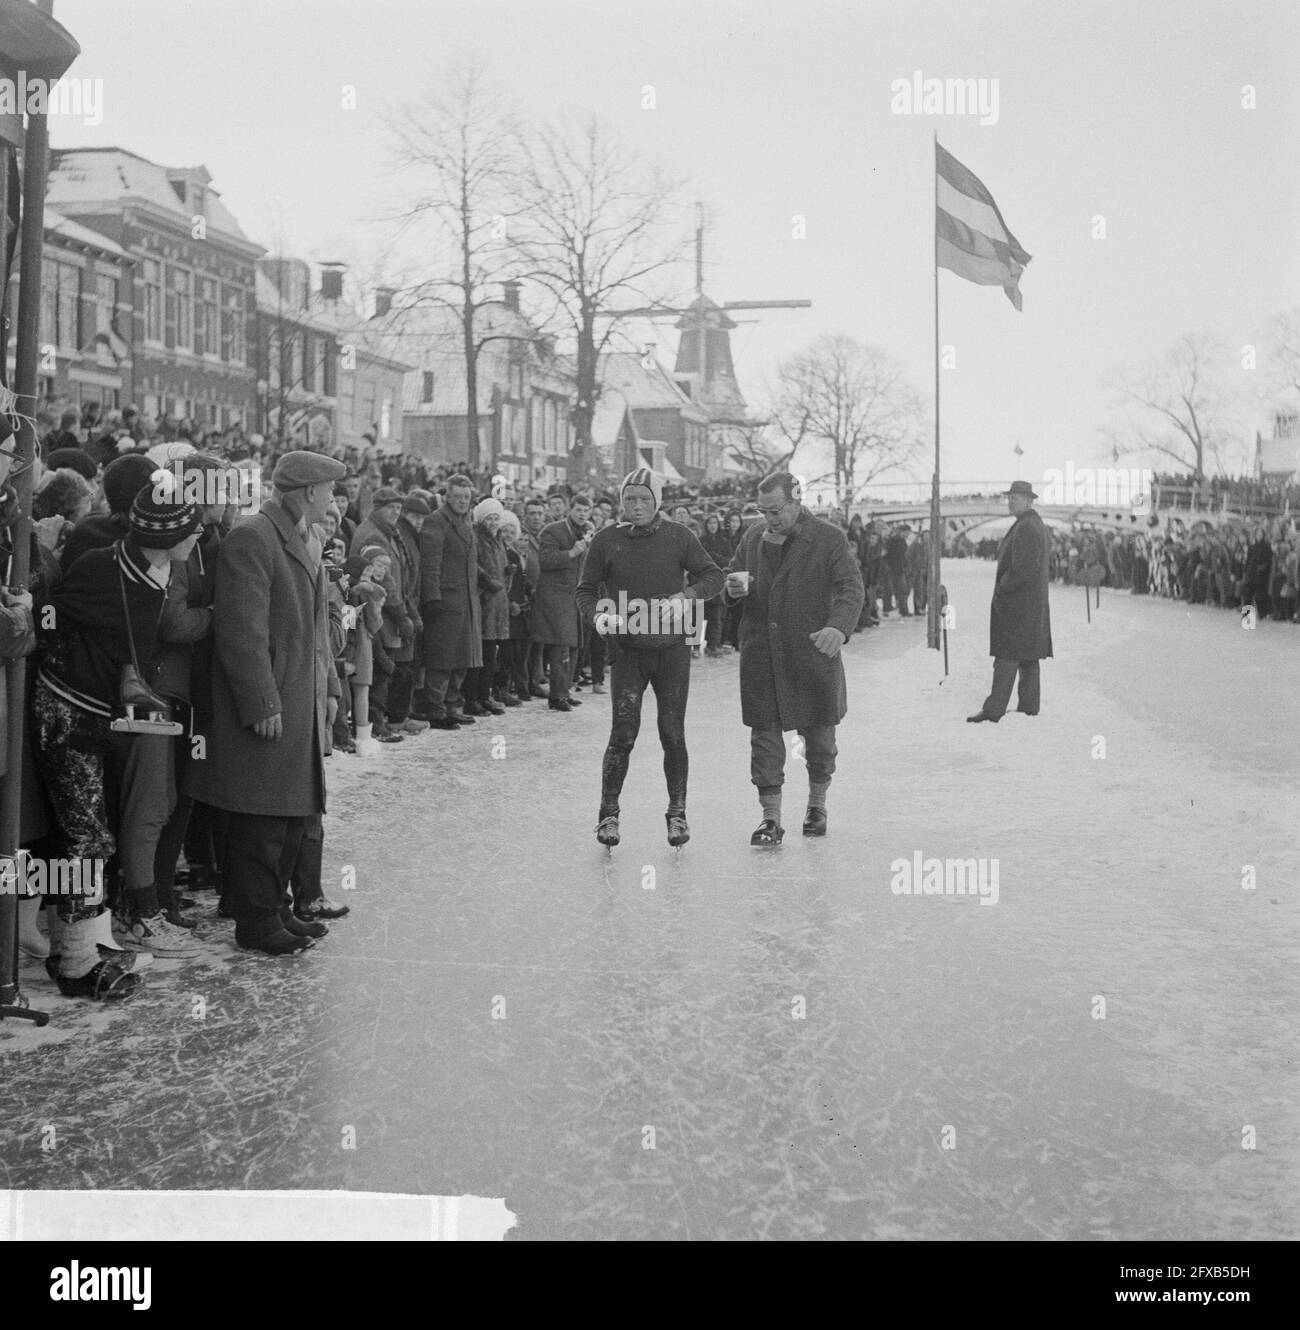 Elfstedentocht 1963, 18 January 1963, skating, sports, The Netherlands, 20th century press agency photo, news to remember, documentary, historic photography 1945-1990, visual stories, human history of the Twentieth Century, capturing moments in time Stock Photo